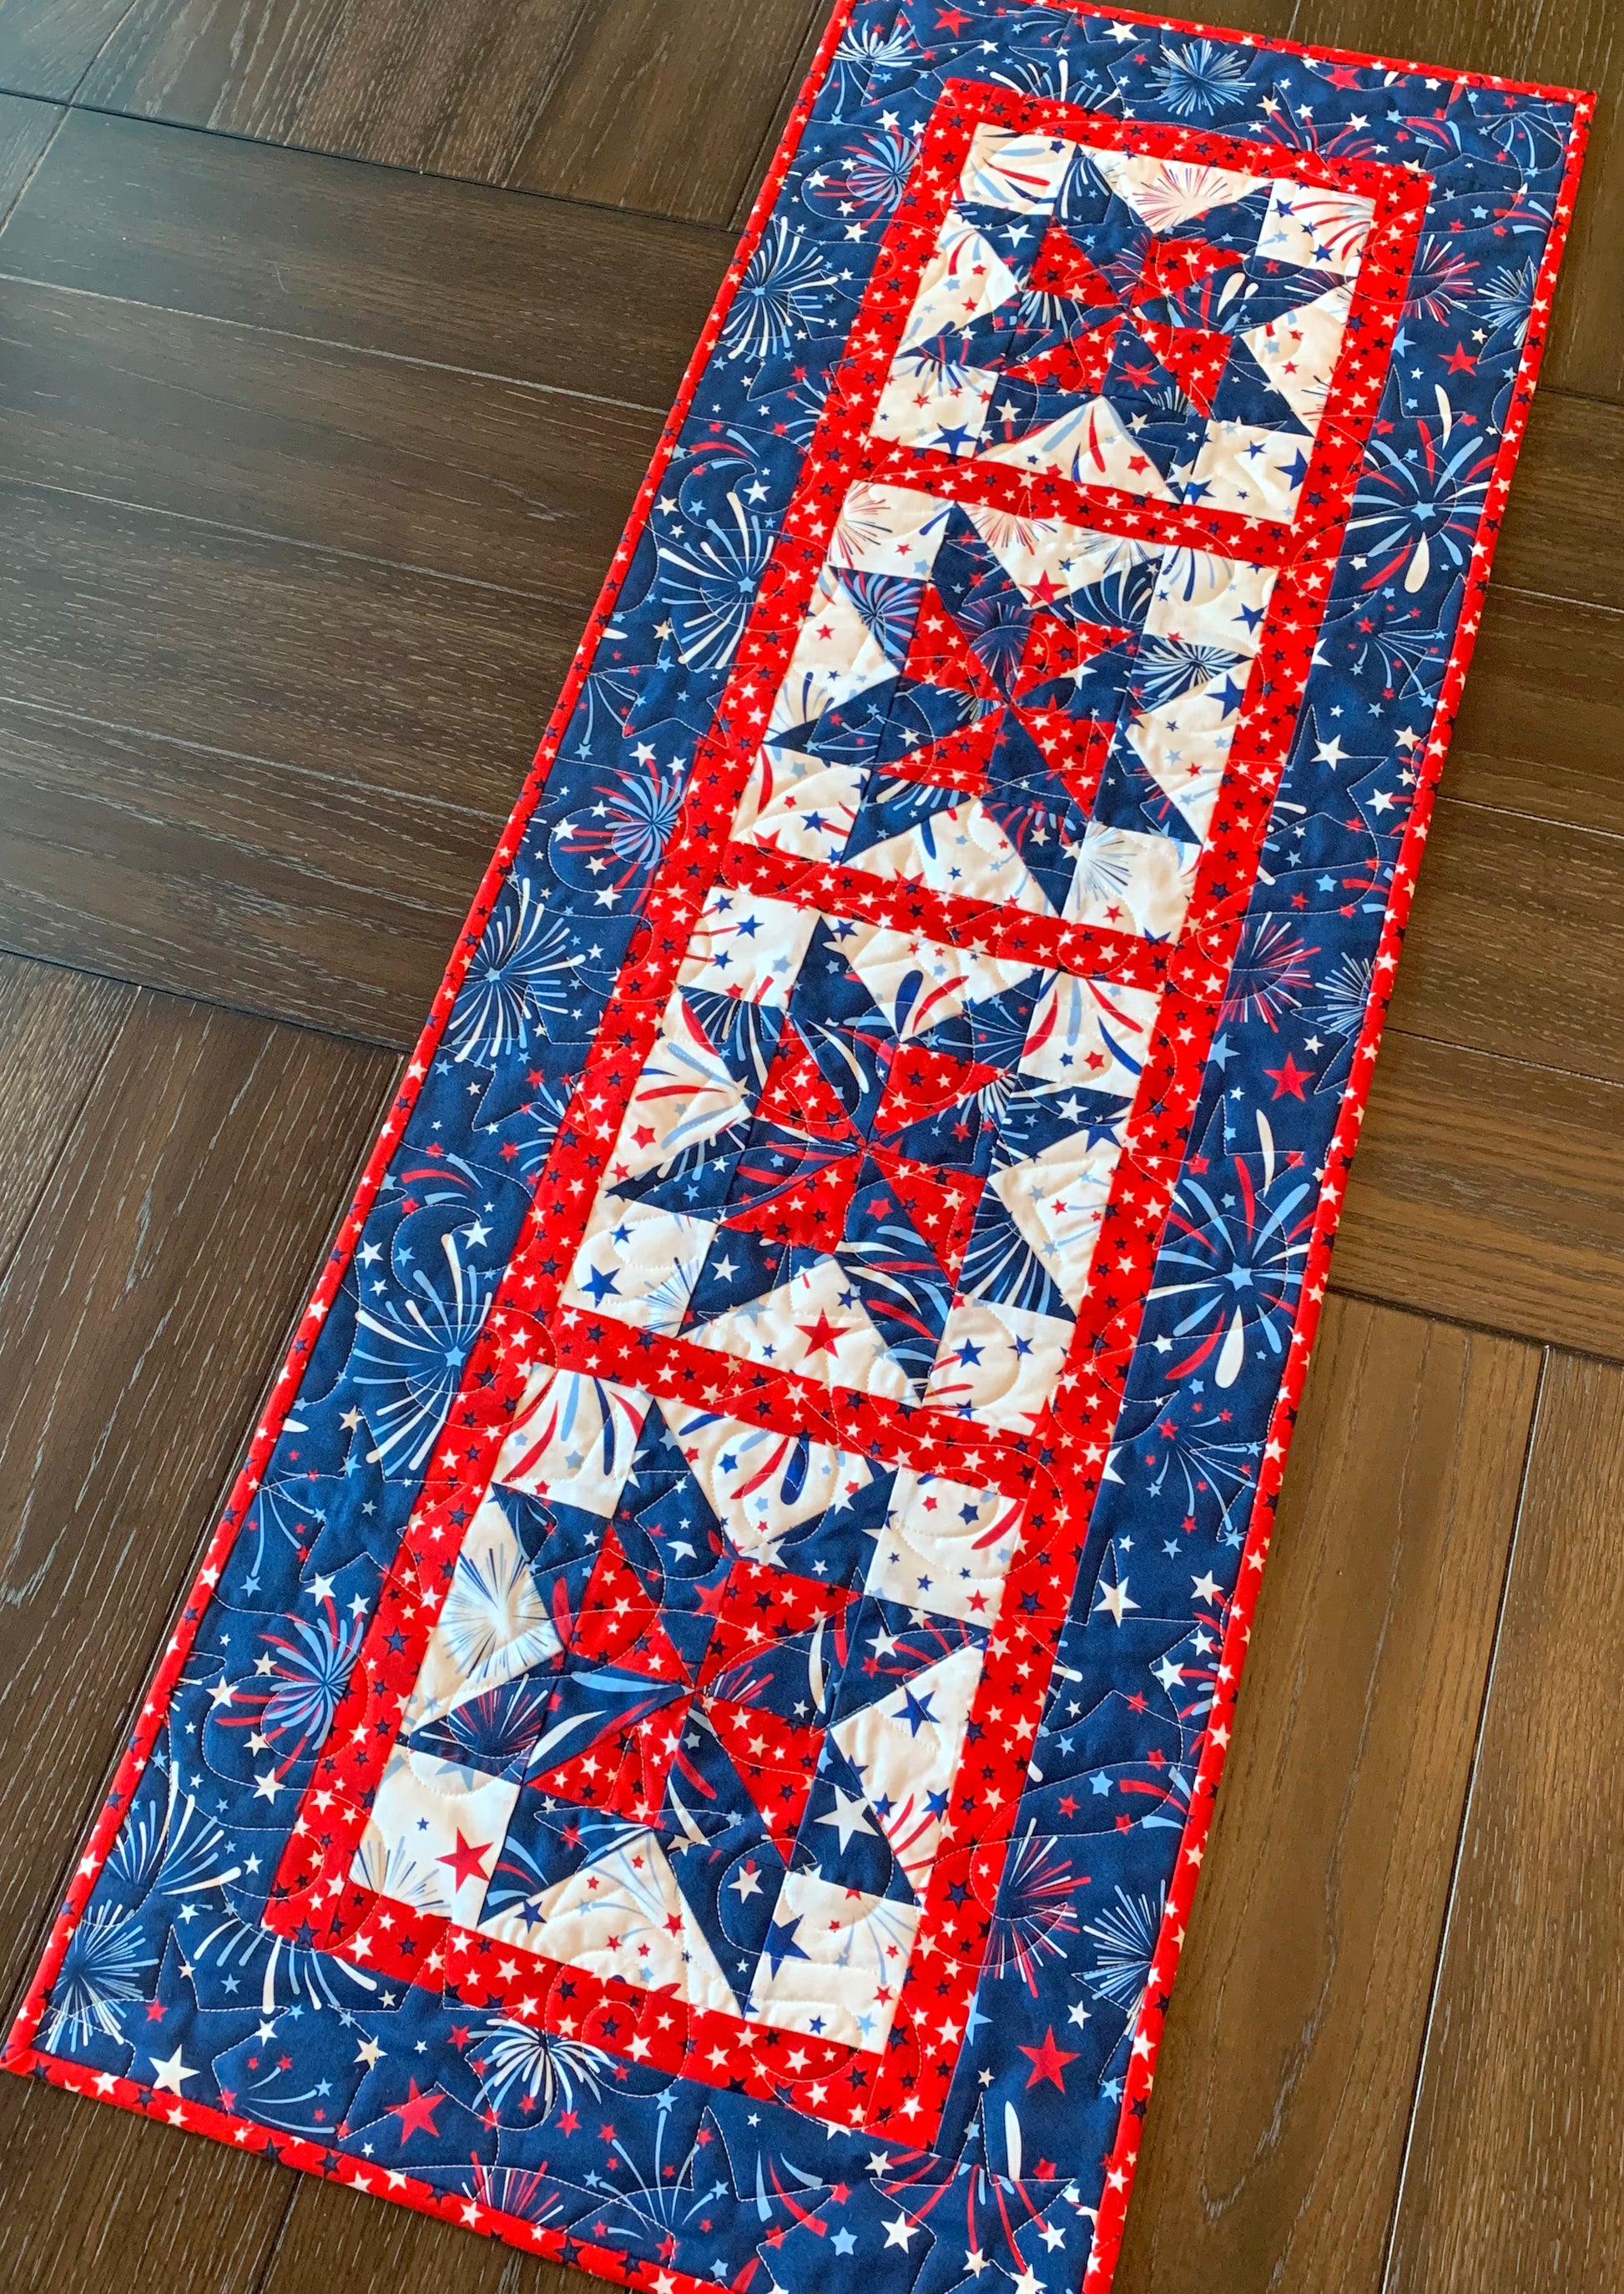 Red white and blue patriotic table runner with four center star blocks that have a pinwheel in the center. The runner has red star sashing between the blocks and a blue fireworks border. Runner is shown displayed on a table.